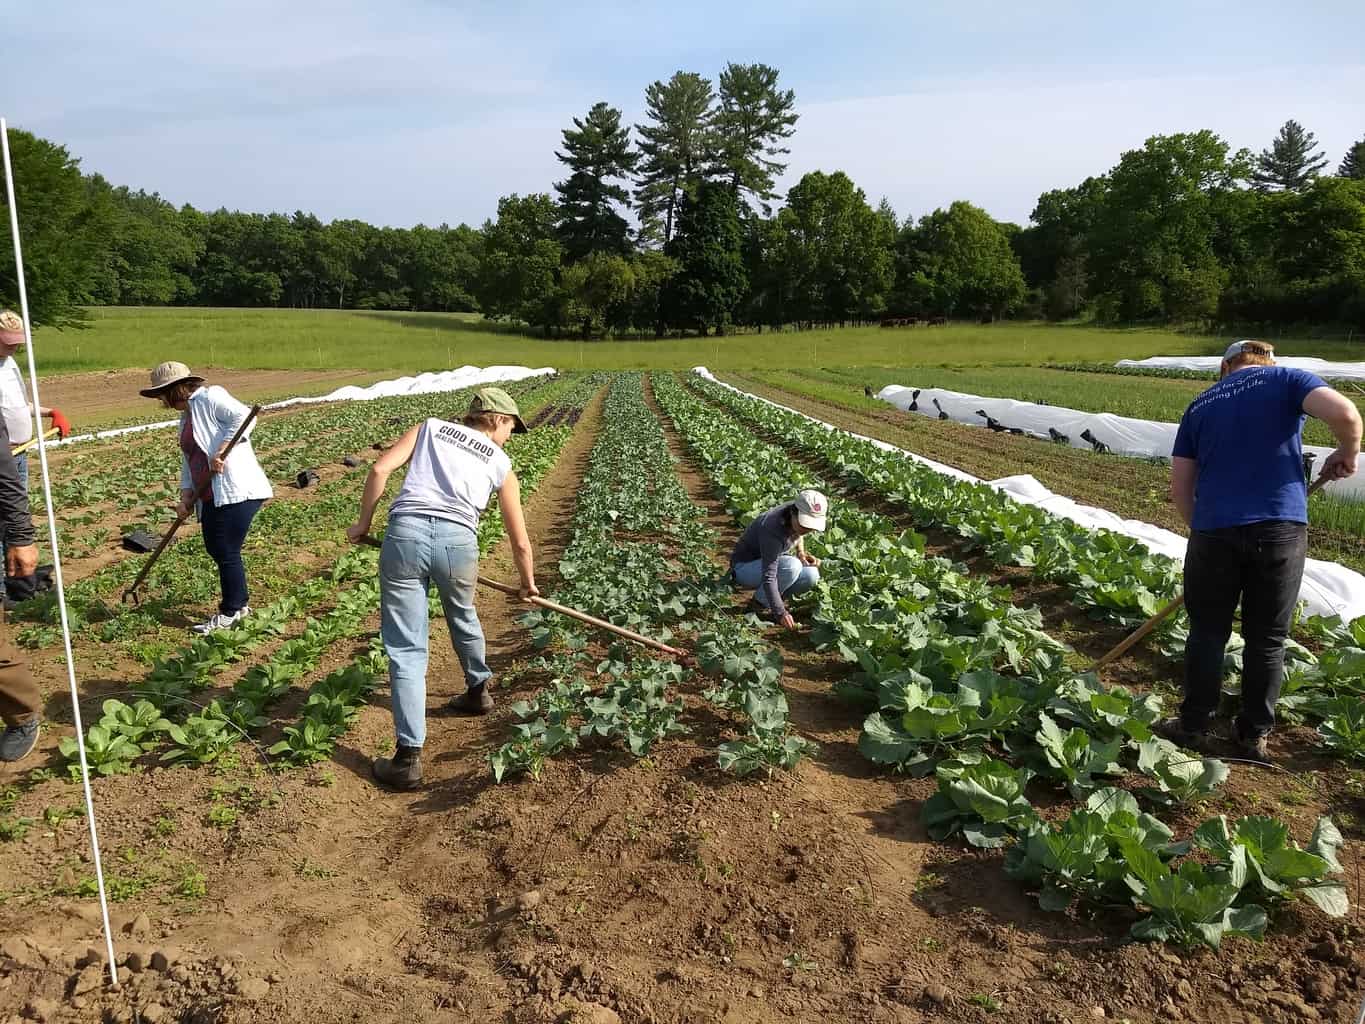 Staff and volunteers weed at Field of Greens